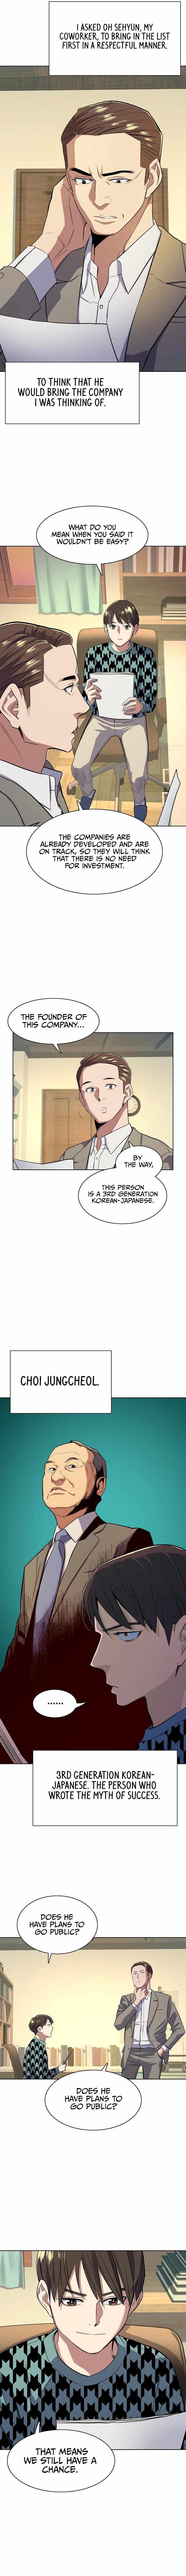 The Chaebeol’s Youngest Son chapter 14